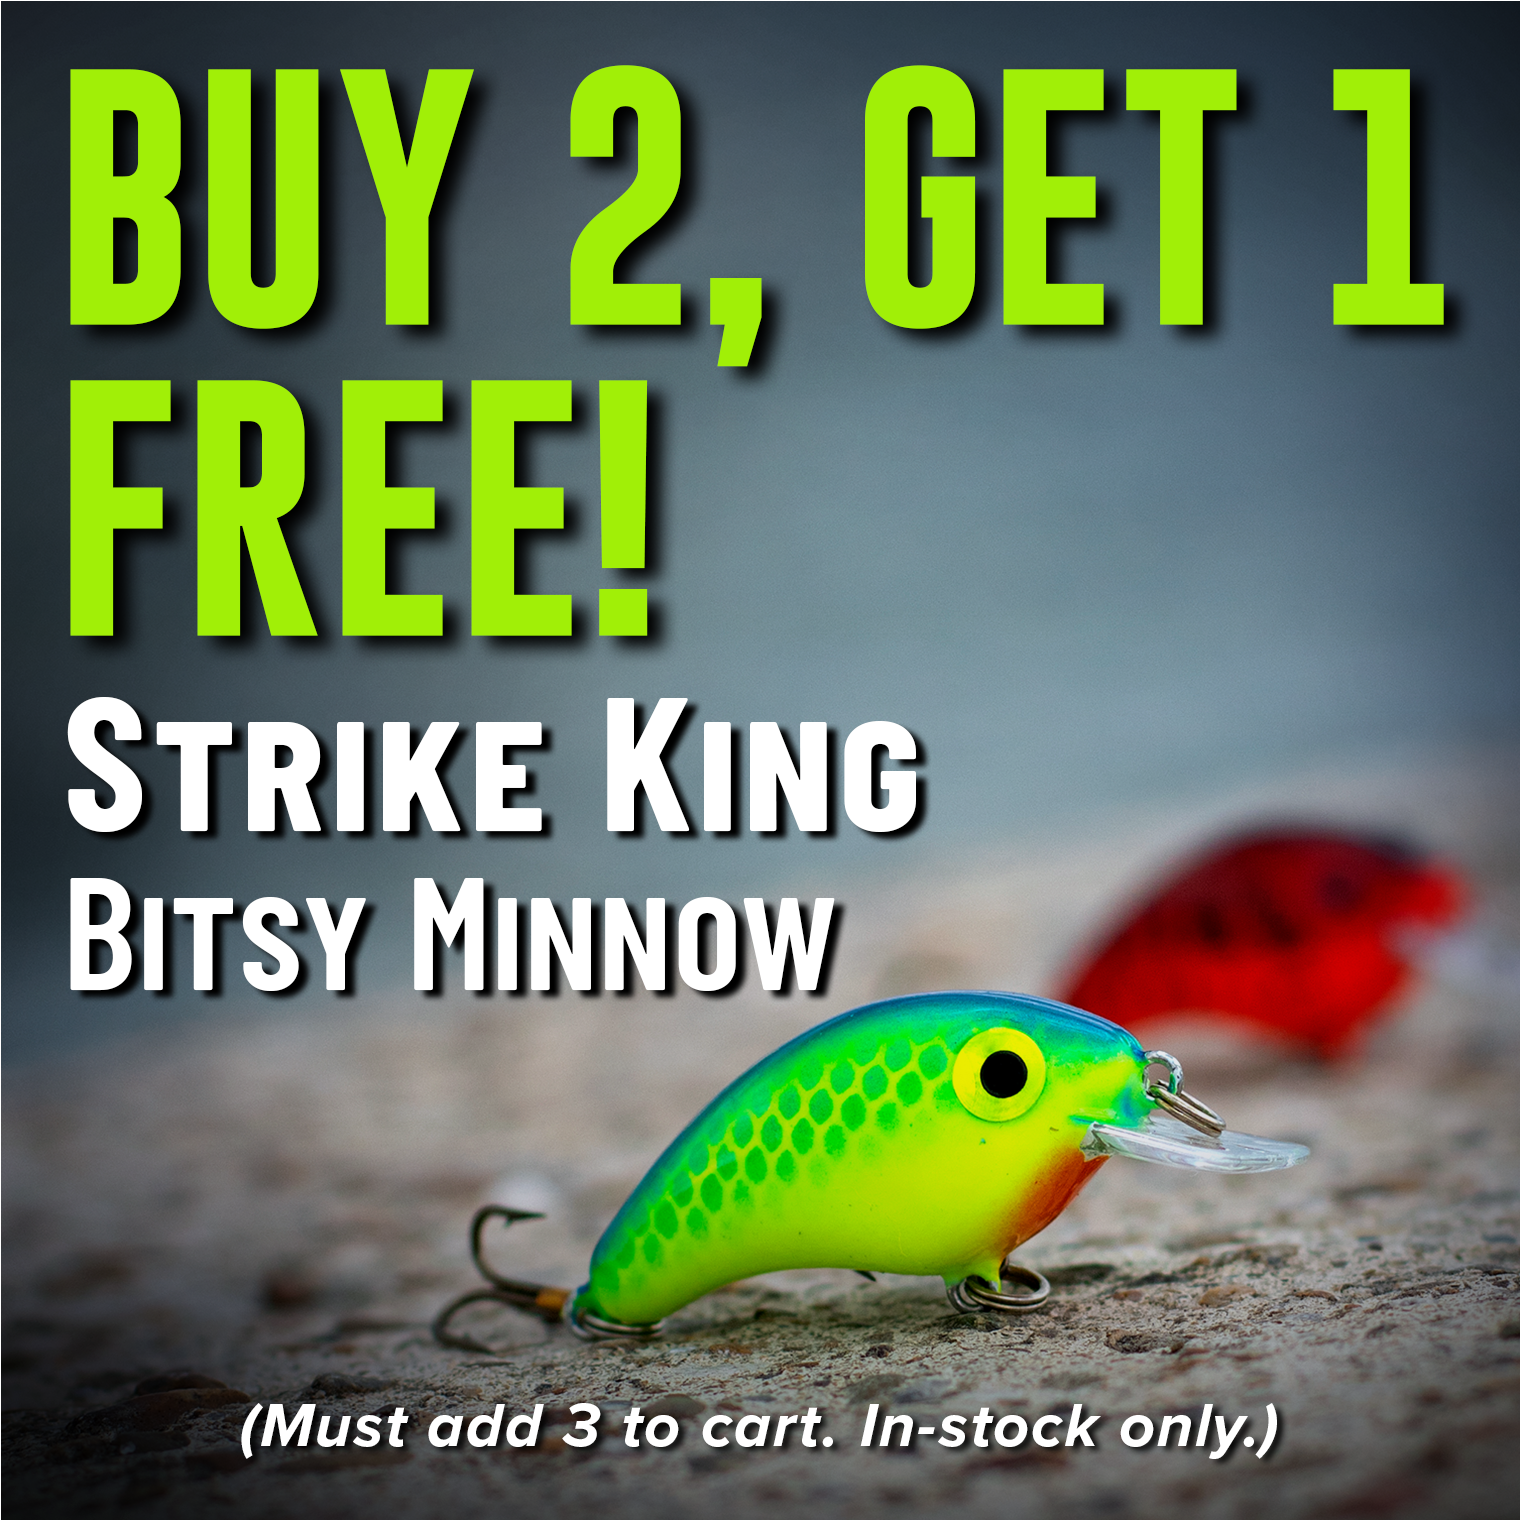 Buy 2, Get 1 Free! Strike King Bitsy Minnow (Must add 3 to cart. In-stock only.)